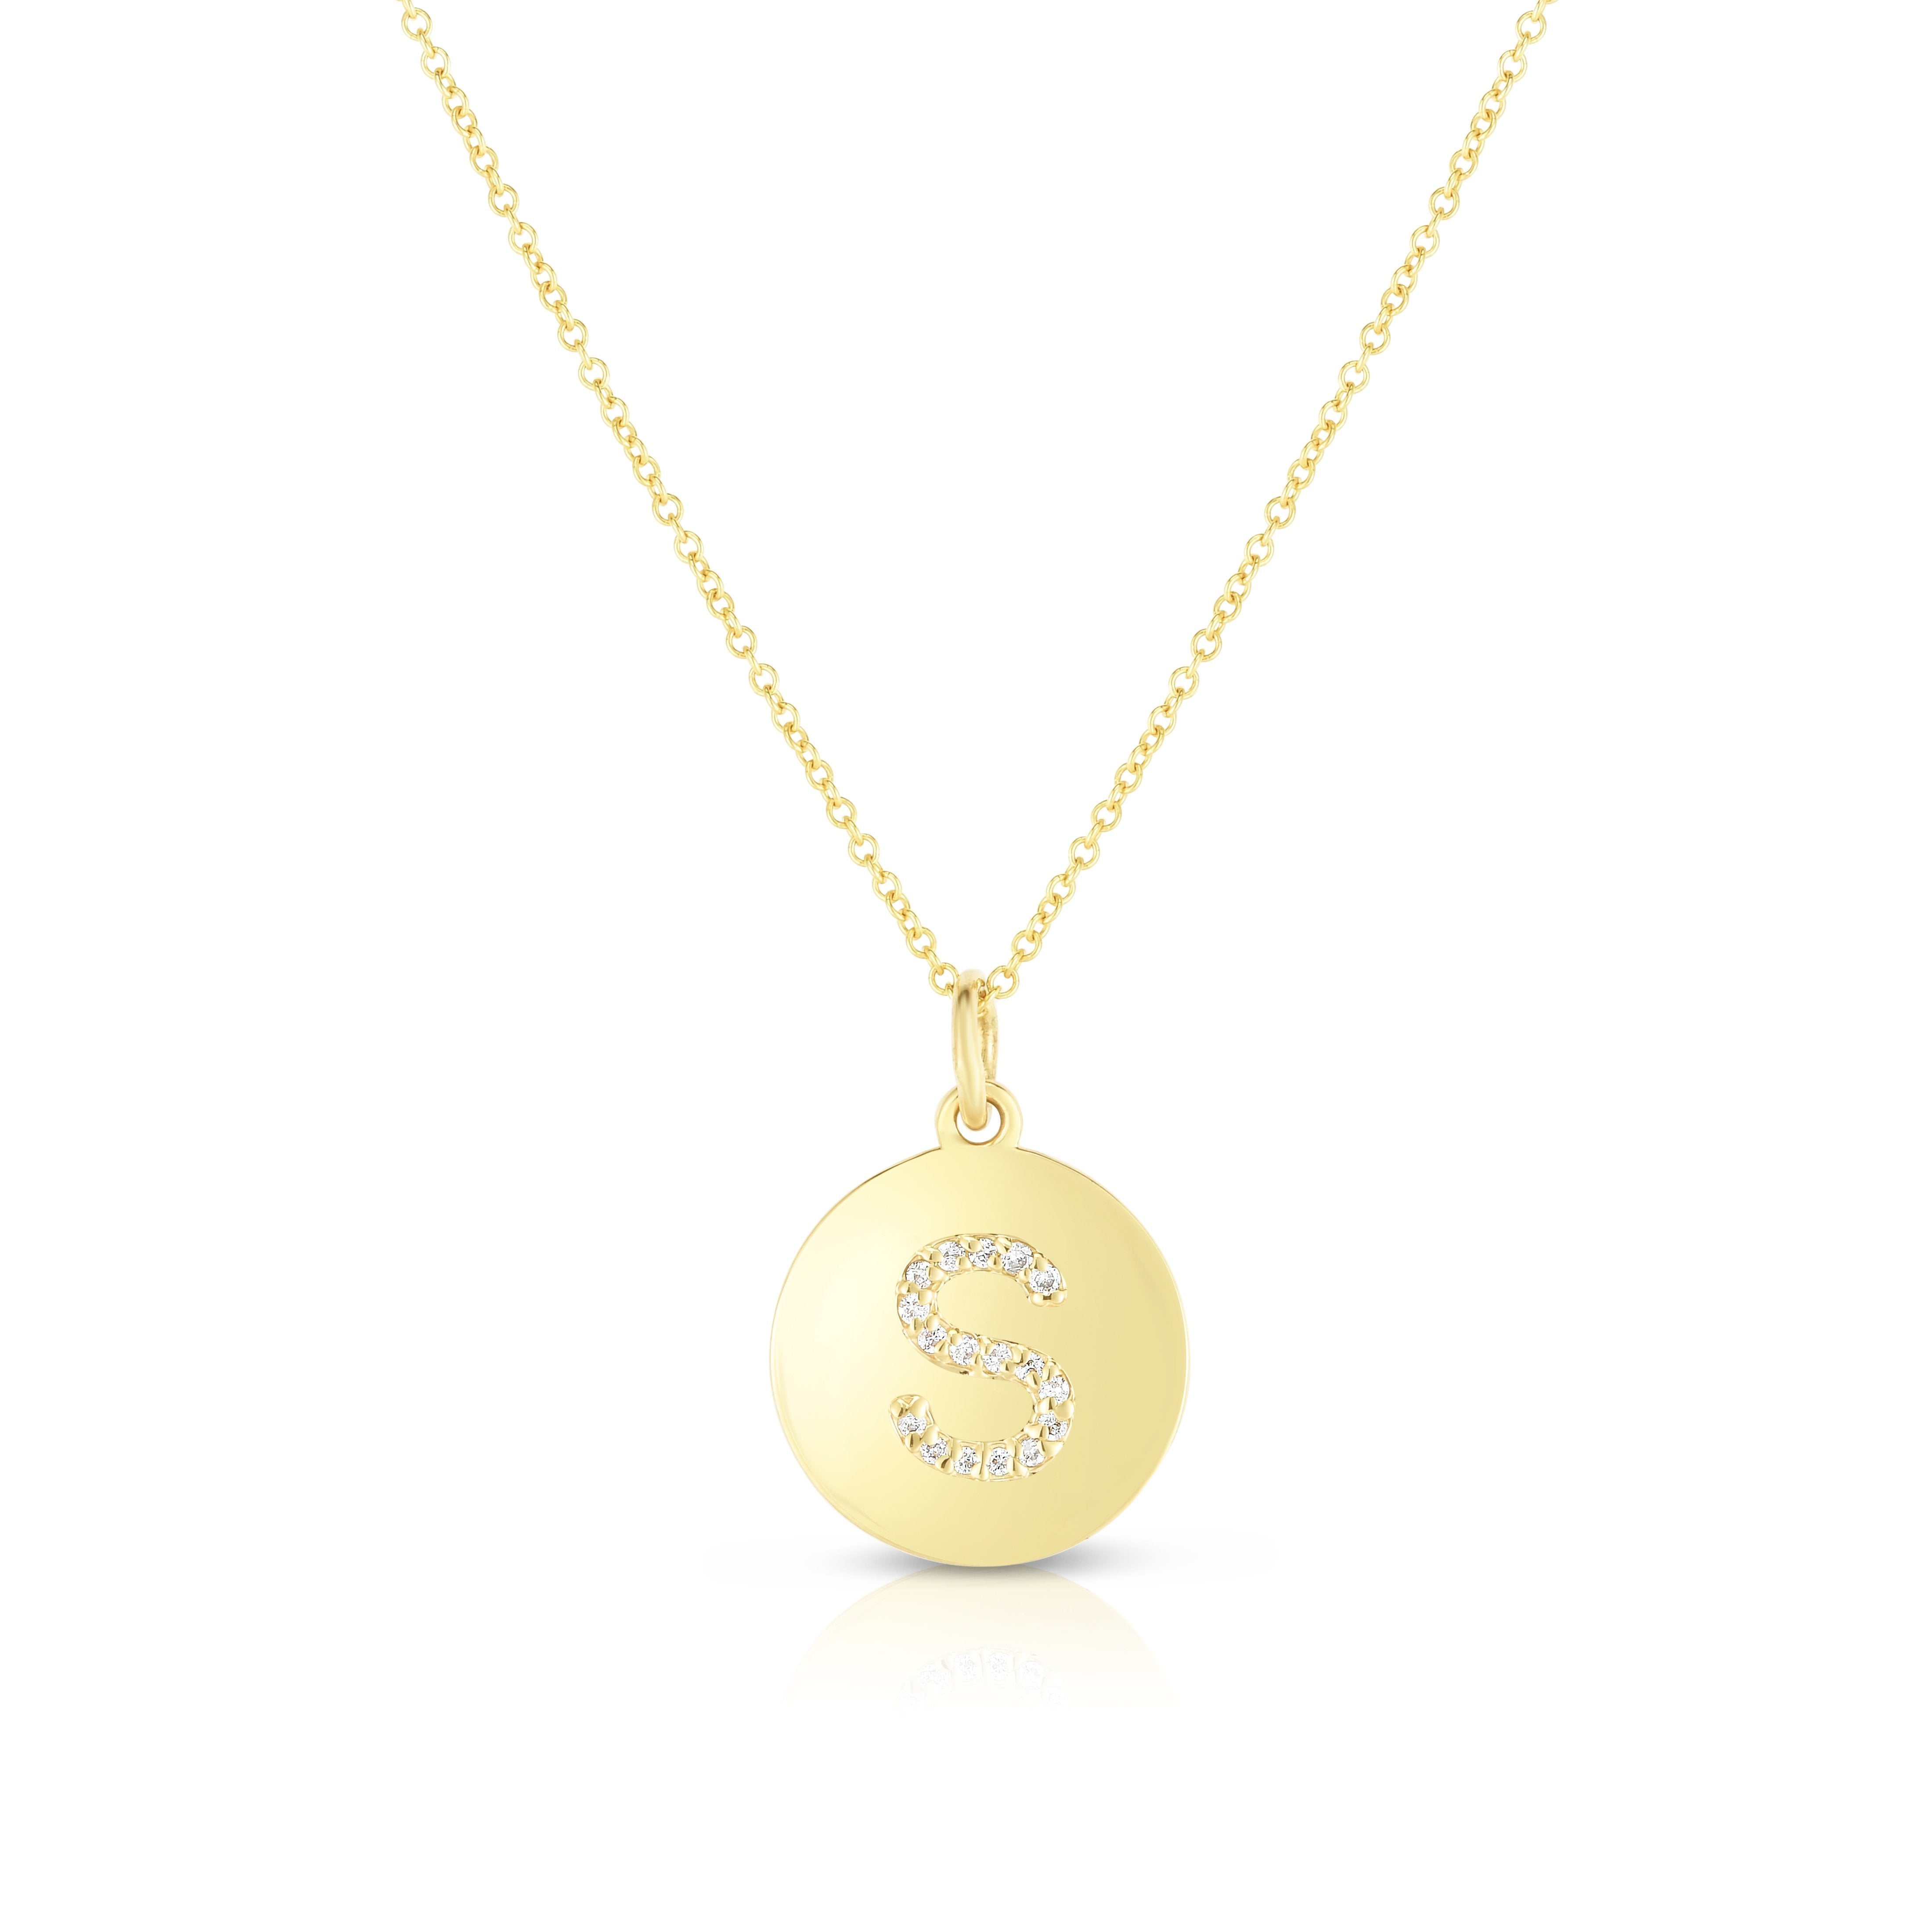 Maya J. Necklaces 14k Yellow Gold / Uppercase / High Polish Initial Disk Necklace